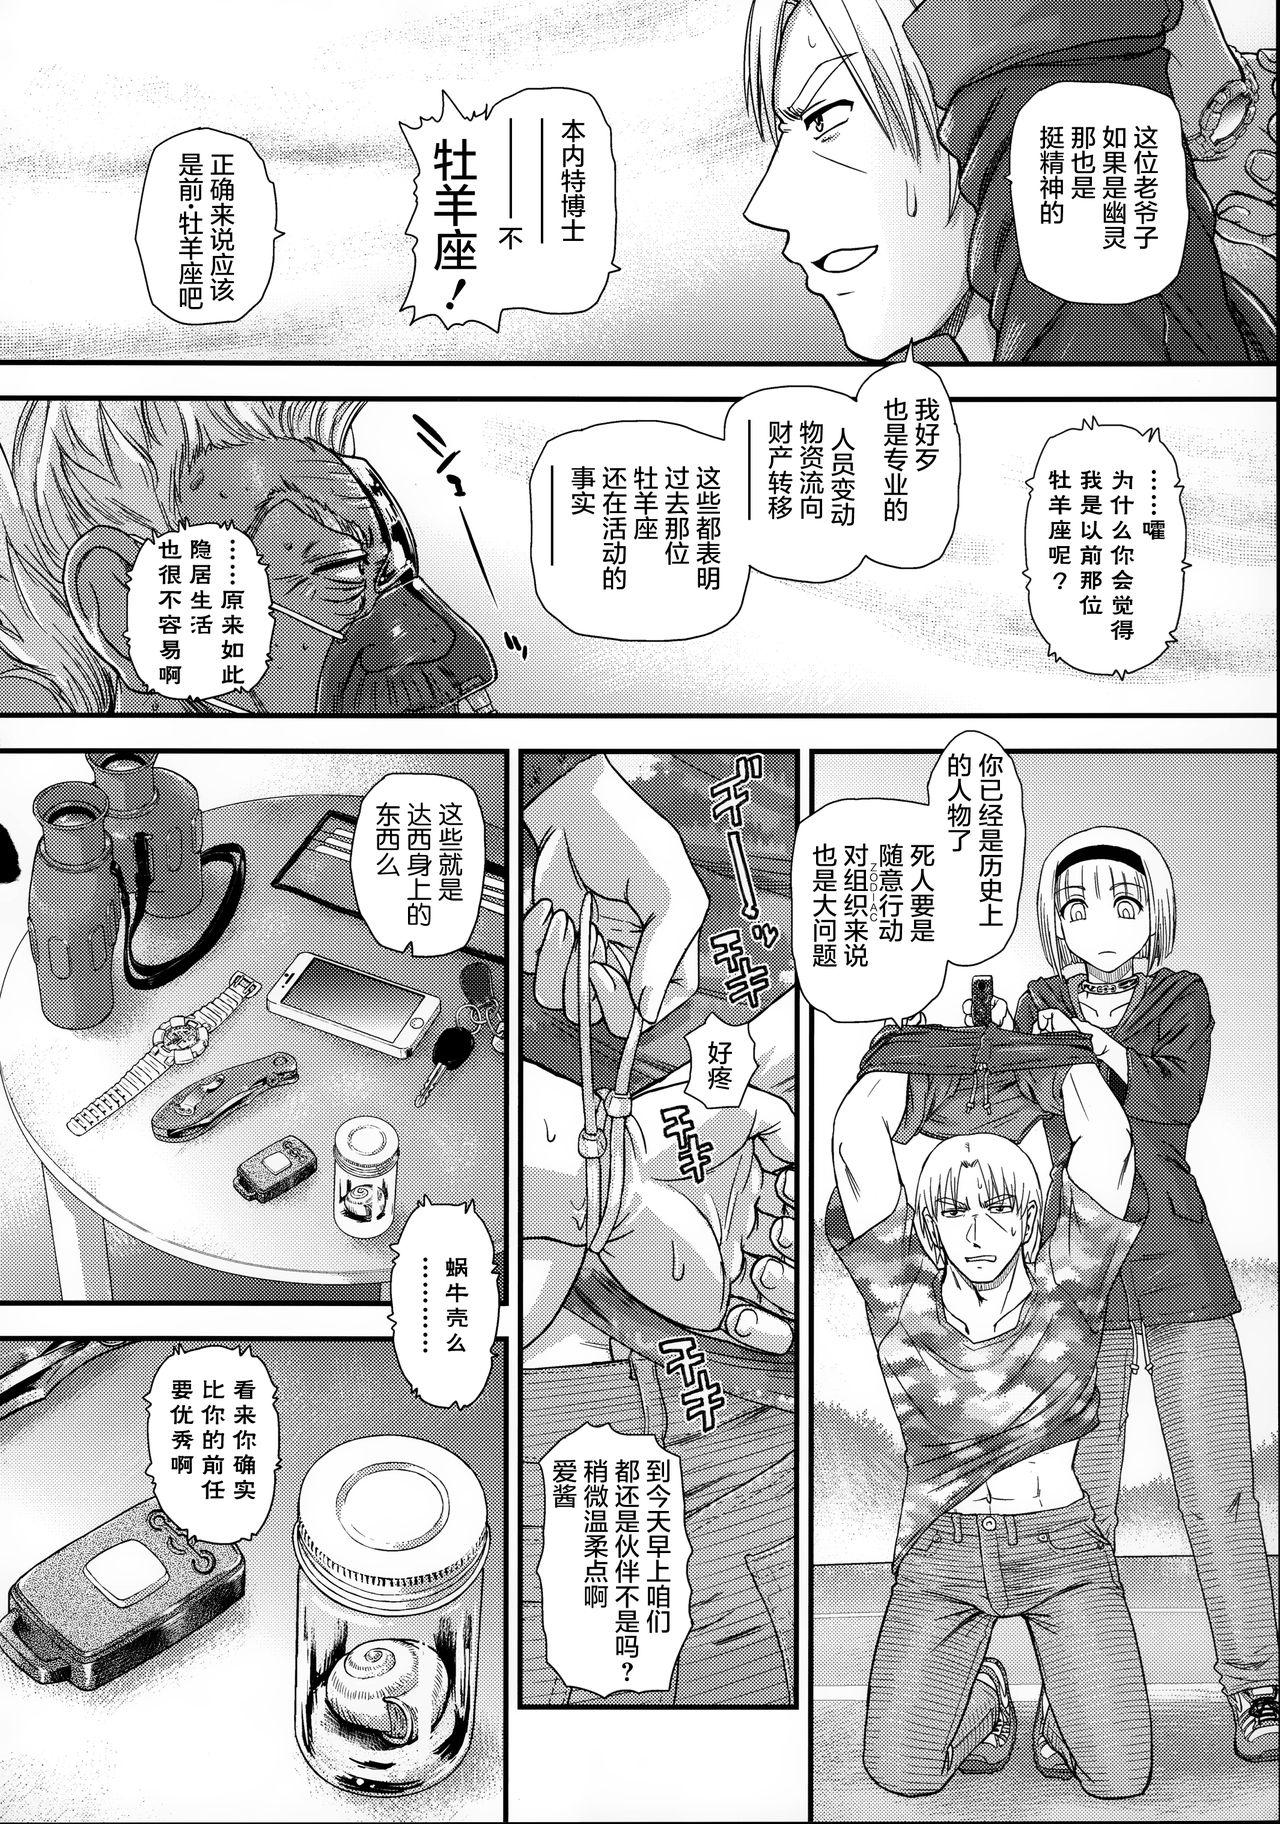 Nurugel (C95) [Behind Moon (Dulce-Q)] DR:II ep.7 ~Dulce Report~ | 达西报告II Ep.7 [Chinese] [鬼畜王汉化组] - Original Banging - Page 10